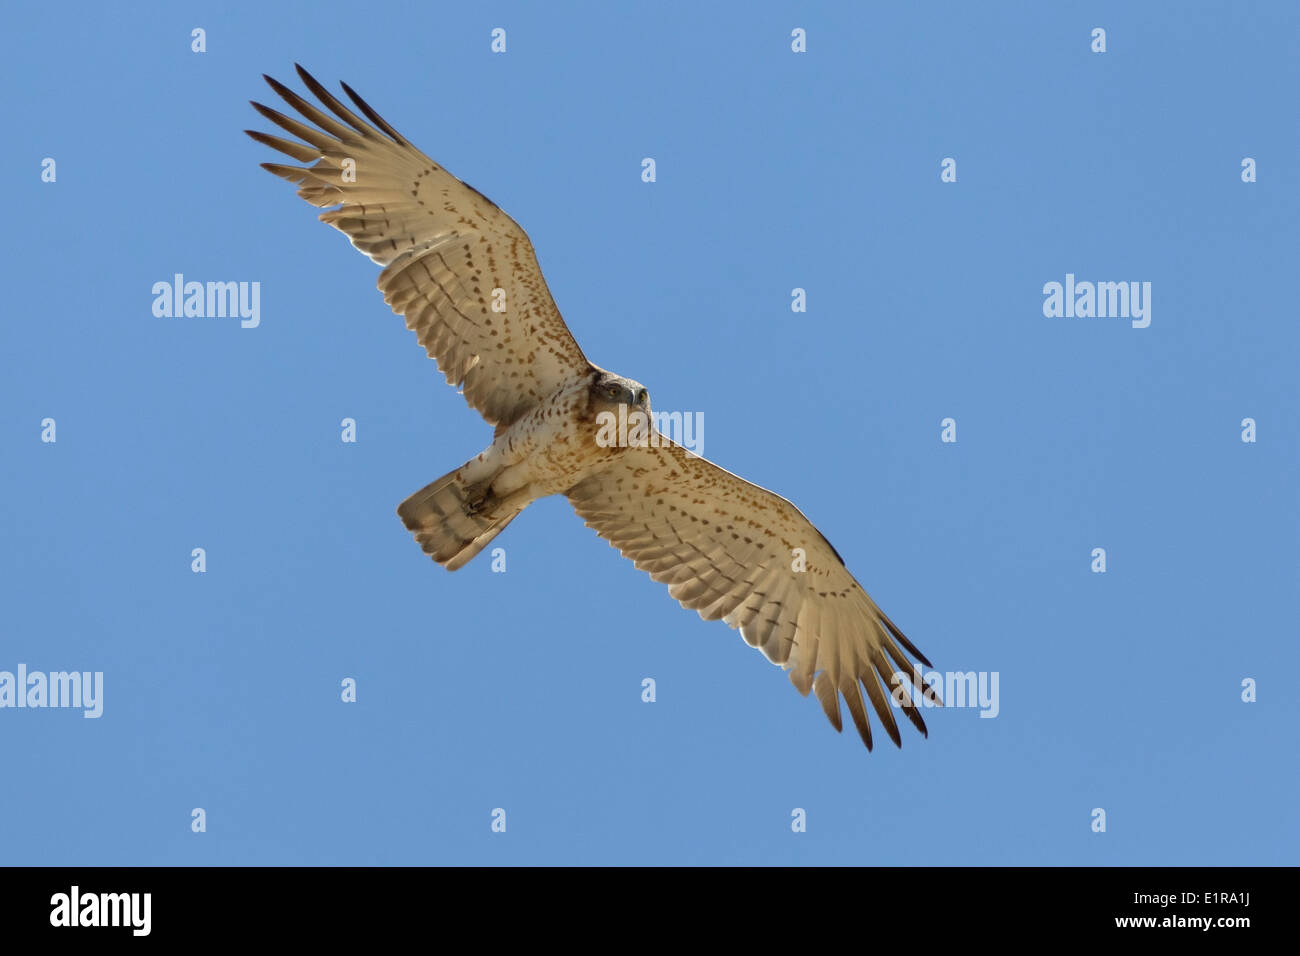 Short-toed Eagle soaring with stretched wings against a blue sky. Stock Photo